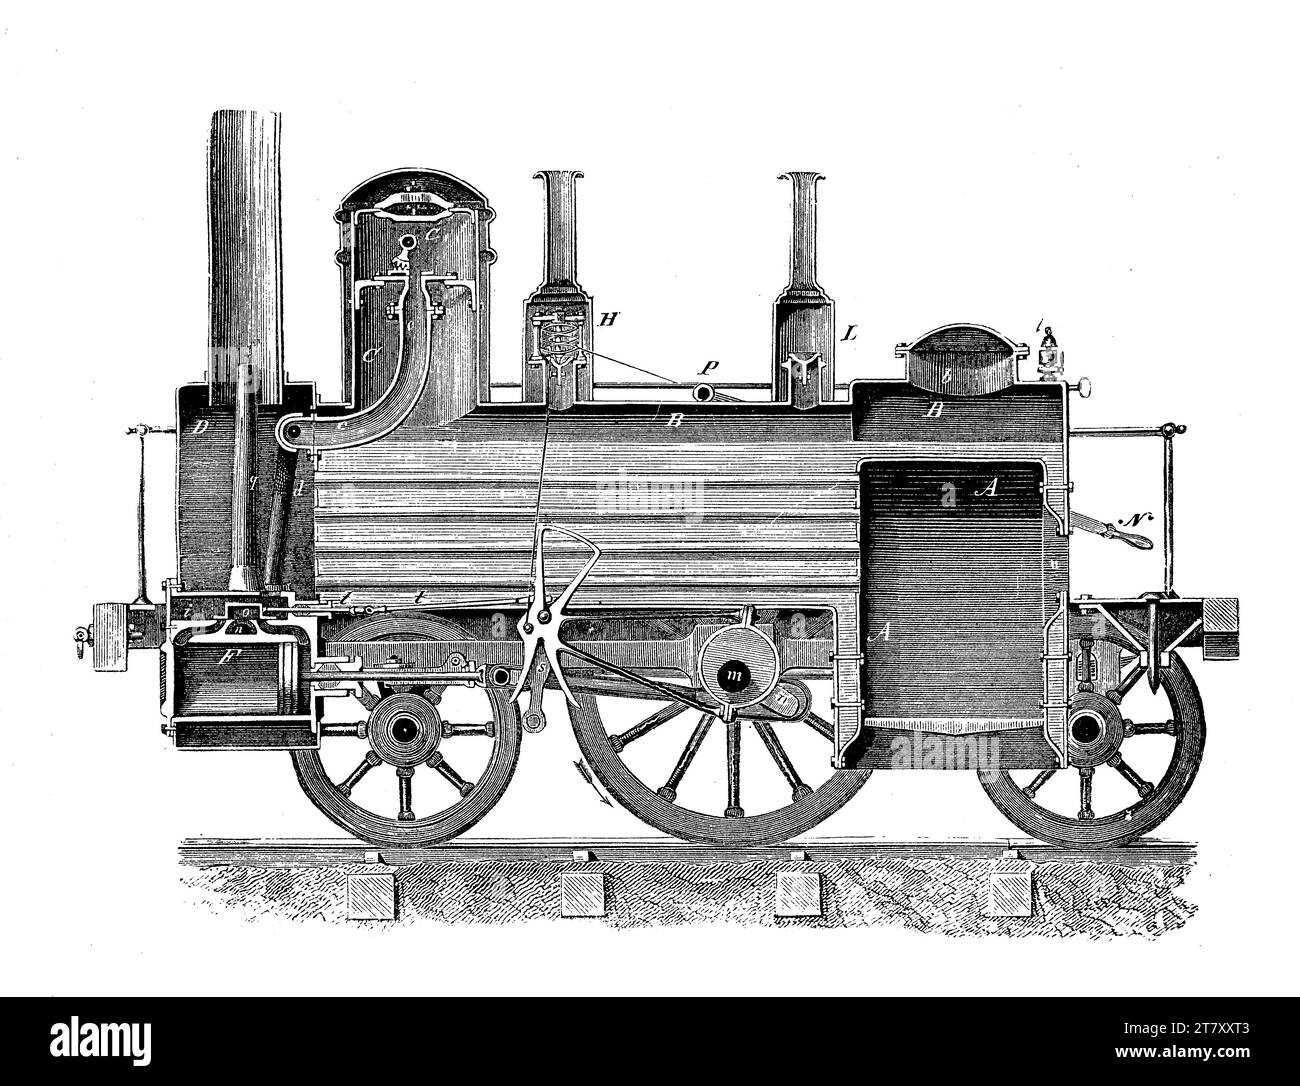 Steam locomotive section lateral view Stock Photo